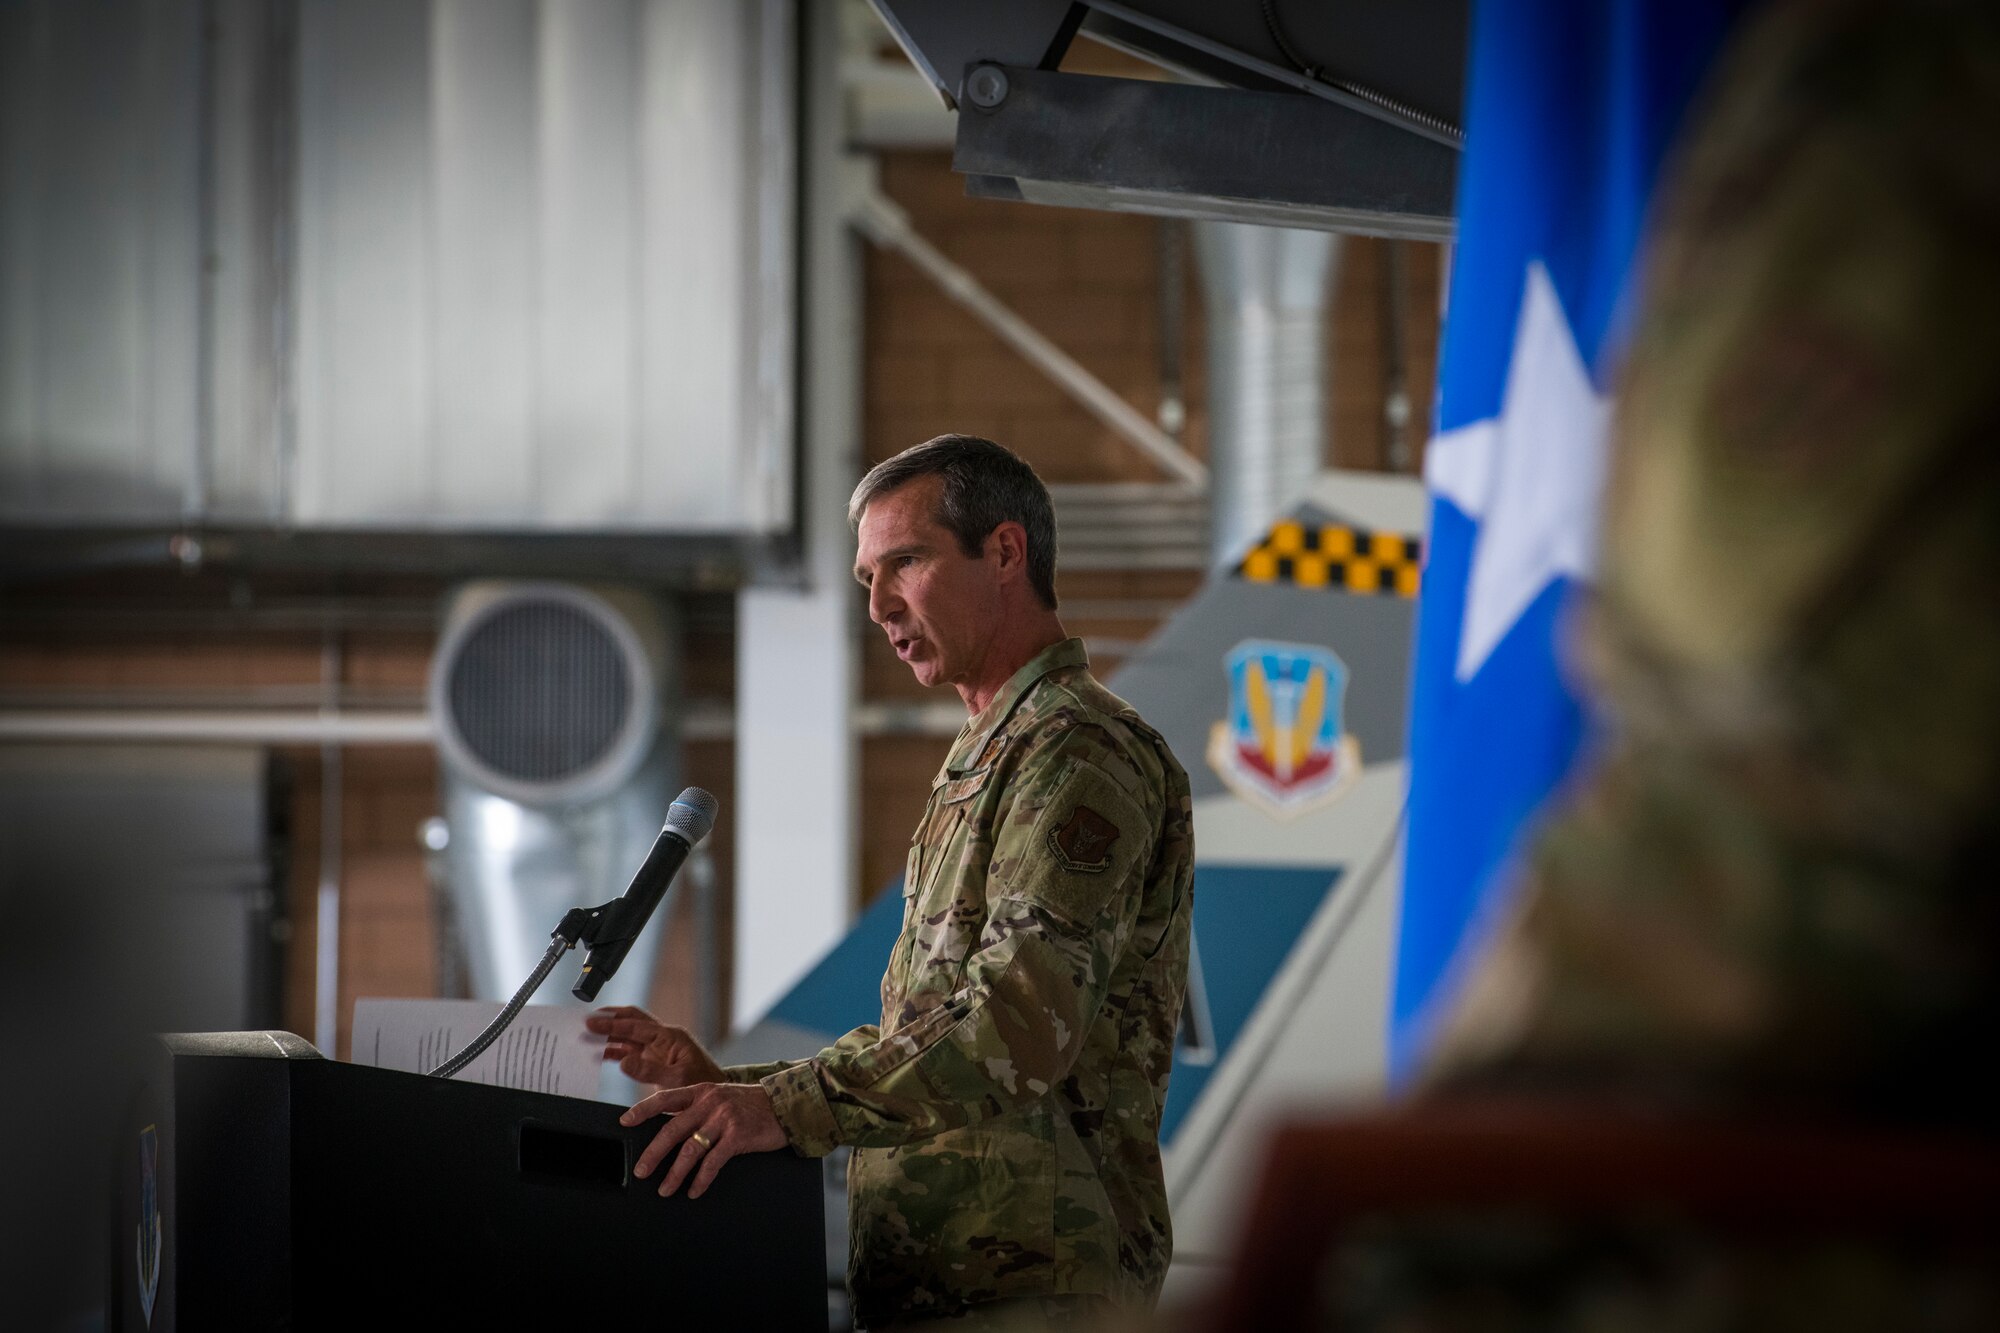 Maj. Gen. Bryan Radliff, 10th Air Force commander, shares remarks during the 926th Wing change of command ceremony, June 13, 2021 at Nellis Air Force Base, Nevada. The 10th Air Force operates across multiple domains that include all fighter, bomber, special operations, rescue, airborne warning and control, and combat operations. (U.S. Air Force photo by Senior Airman Brett Clashman)